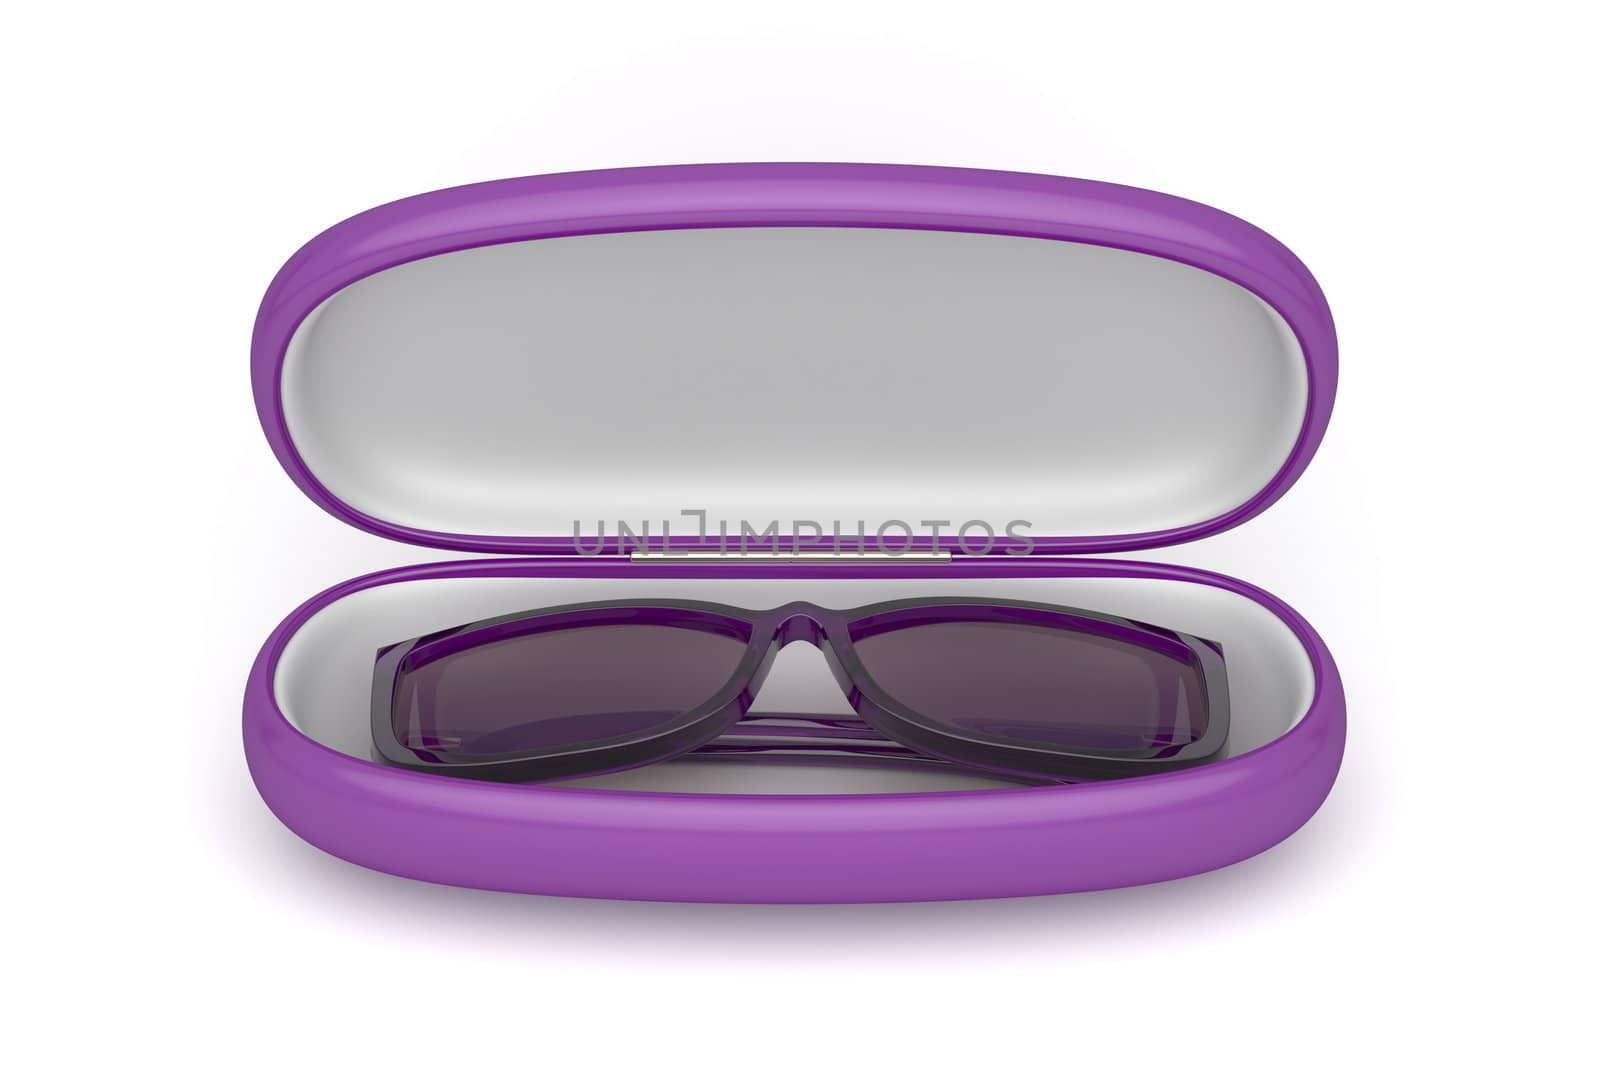 Purple sunglasses by magraphics